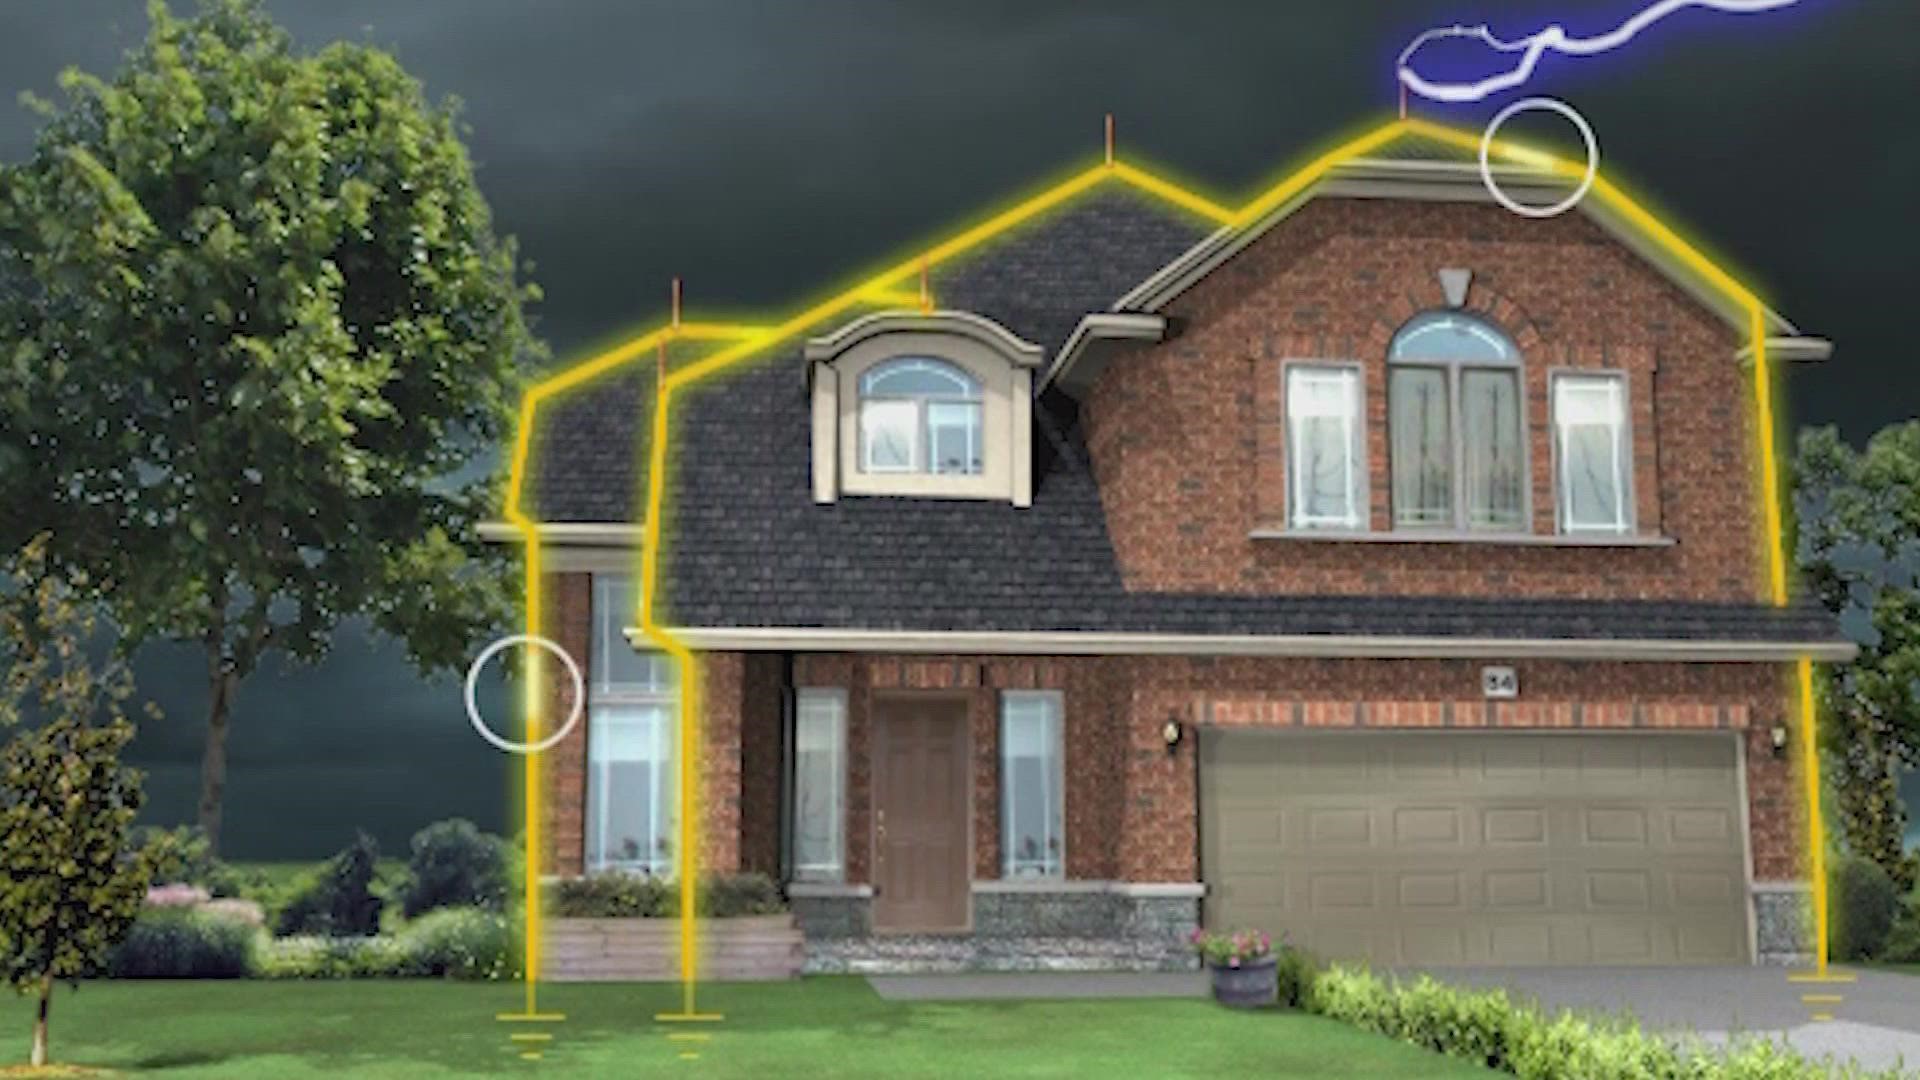 The company uses what they call "air terminals," which look kind of like lightning rods, to help keep homes safe.